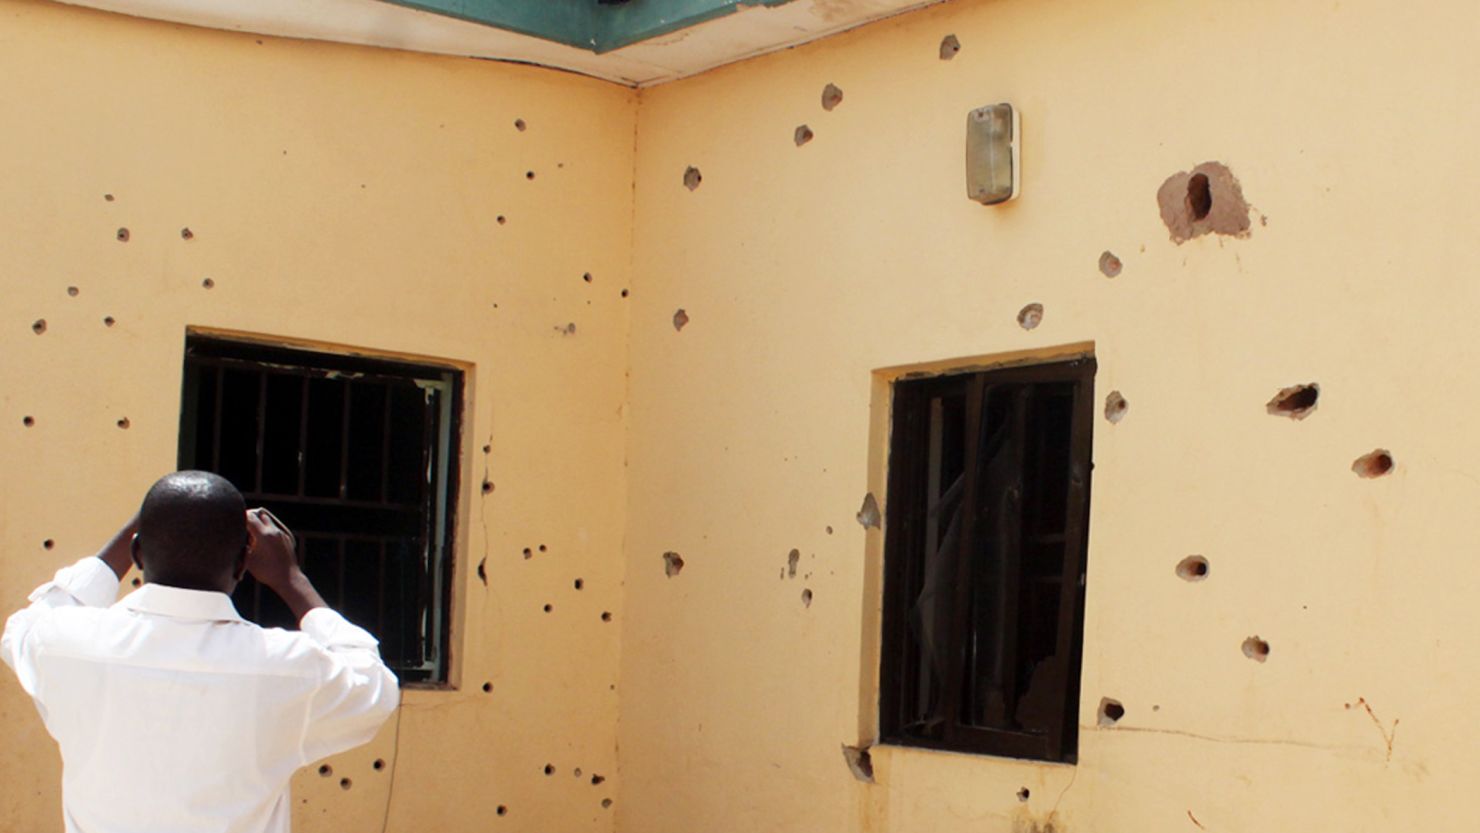 A man takes photos Friday of a bullet-riddled wall at the scene of the failed rescue operation in Nigeria.